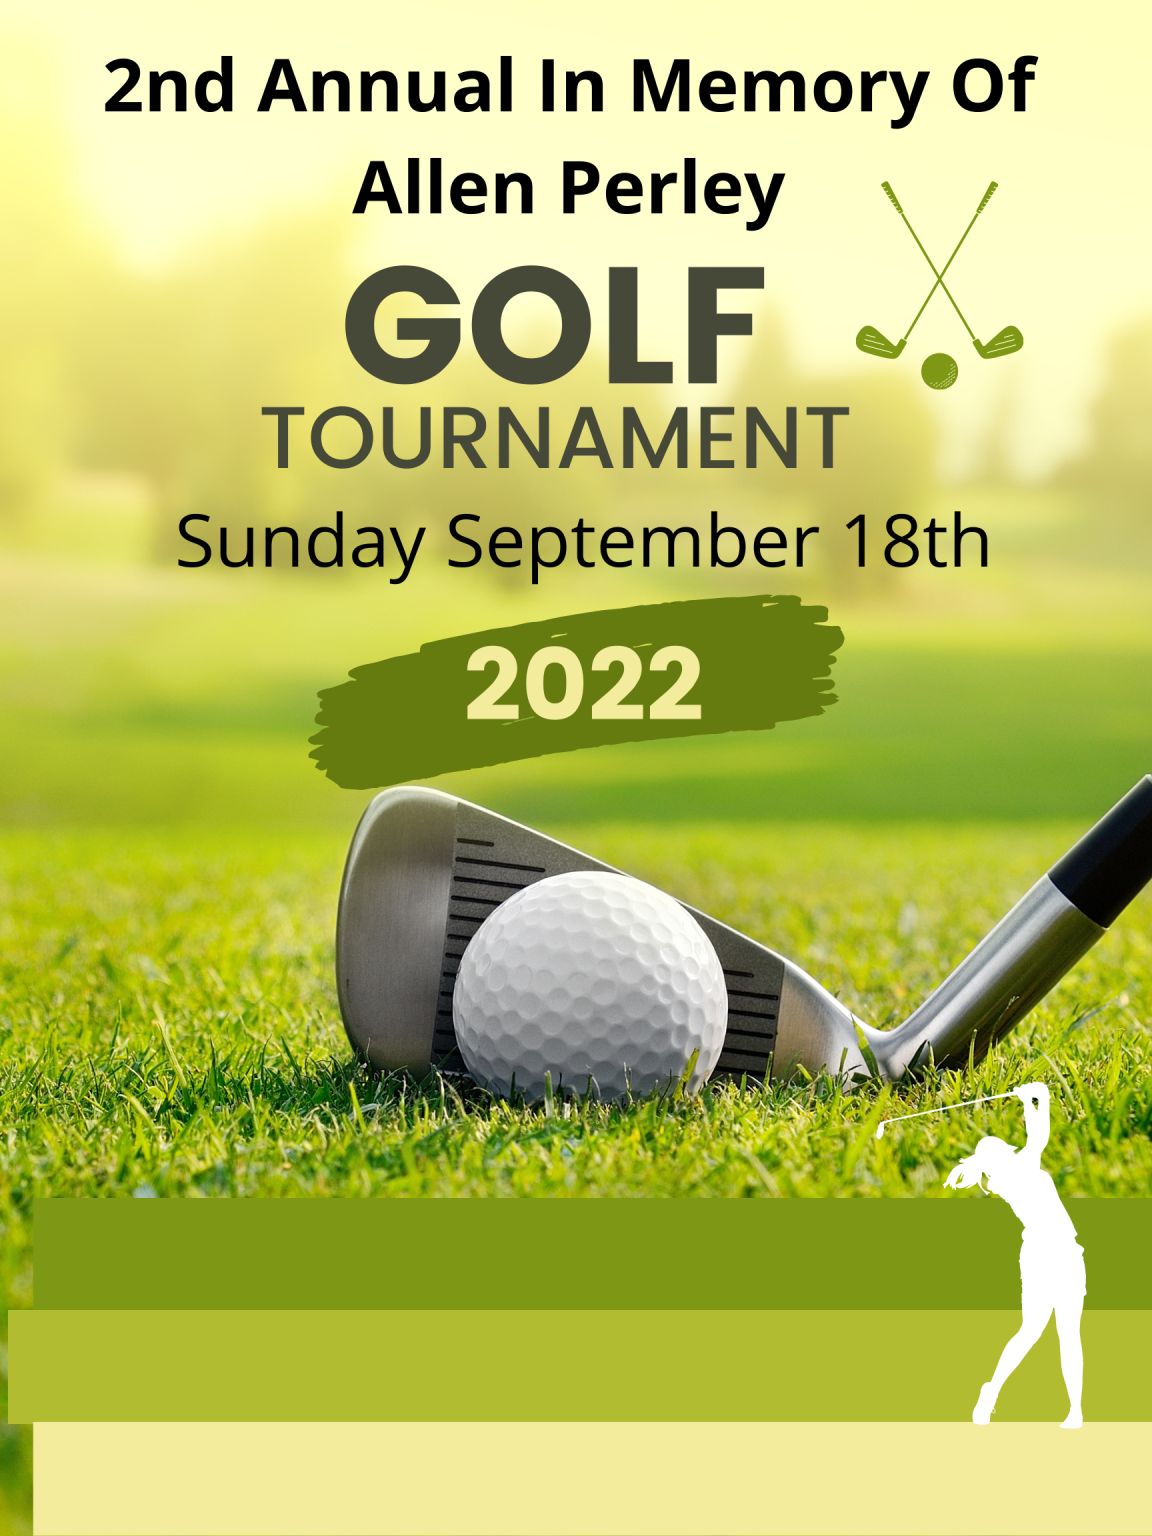 2nd Annual In Memory Of Allen Perley Golf Tournament | GolfTourney.com ...